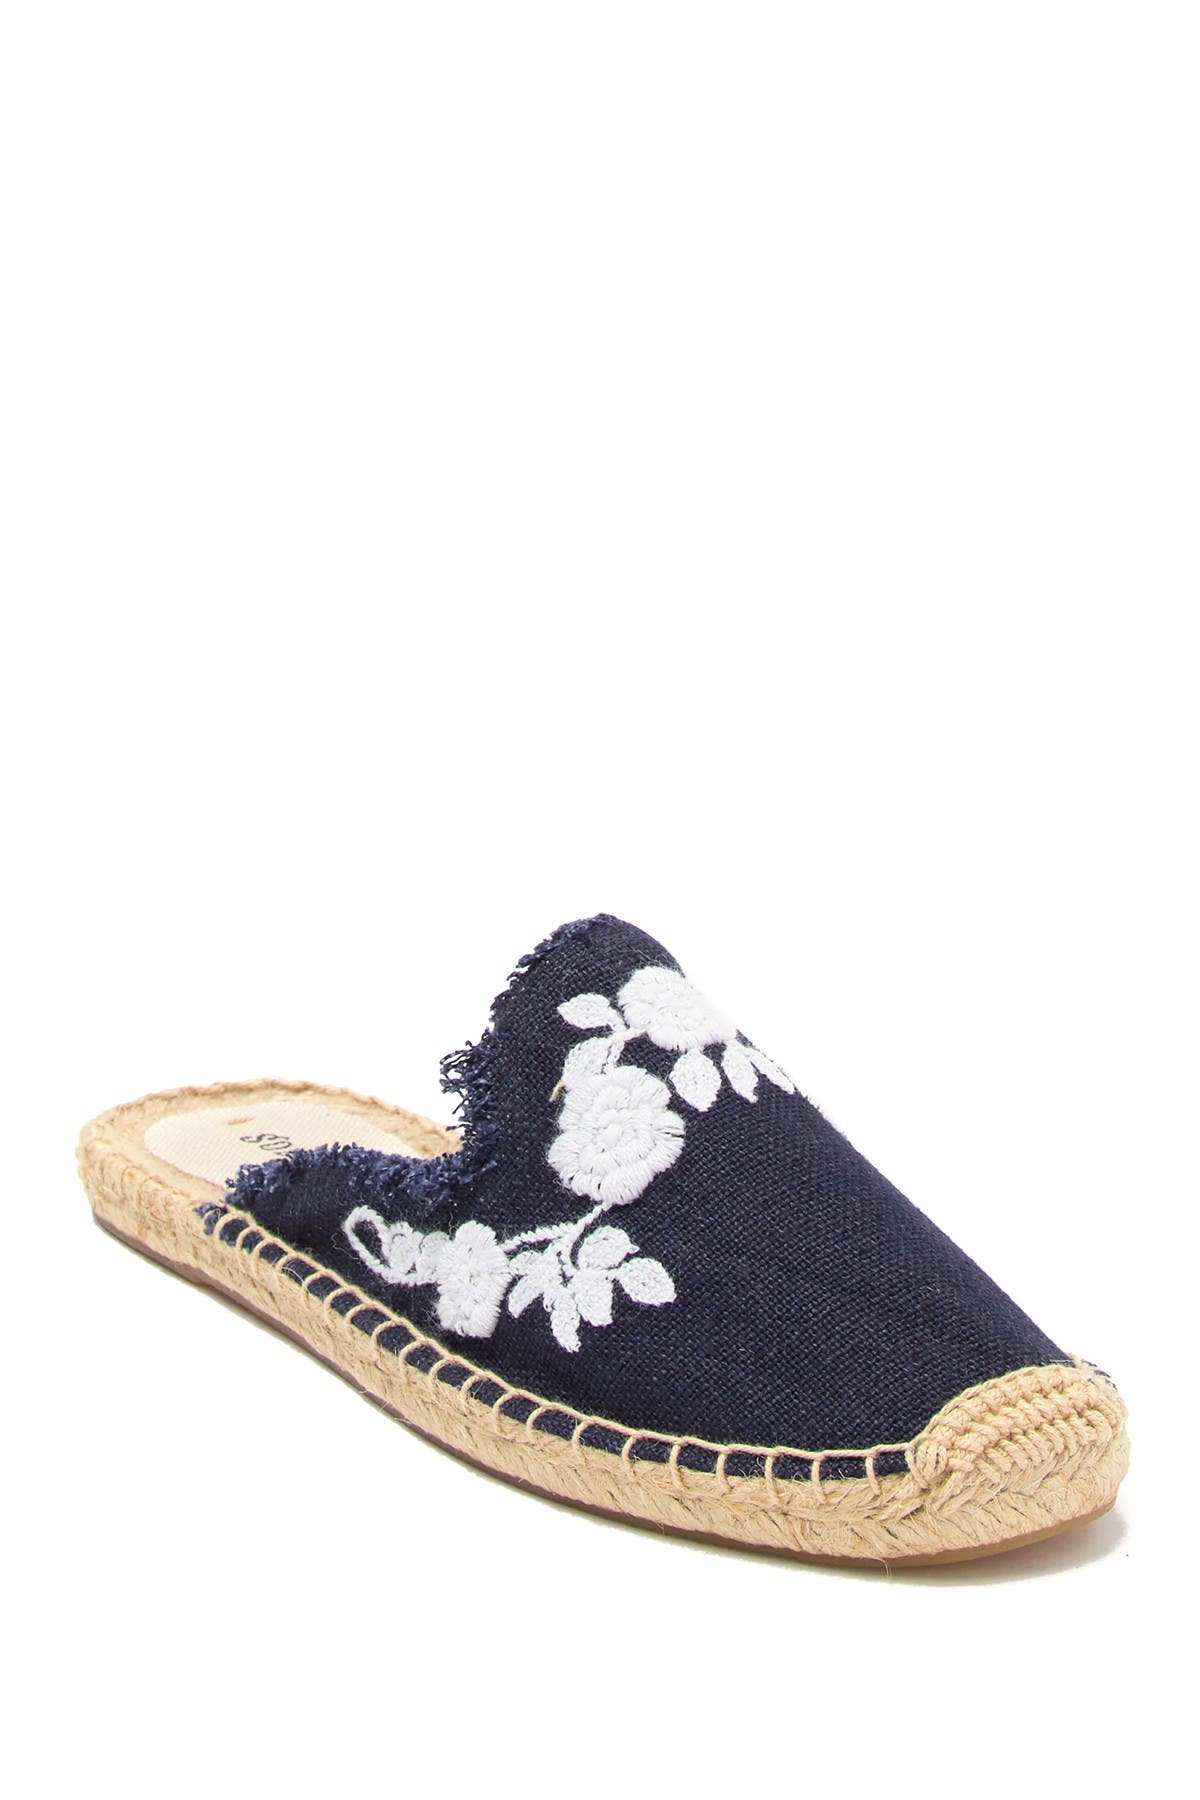 soludos embroidered mule